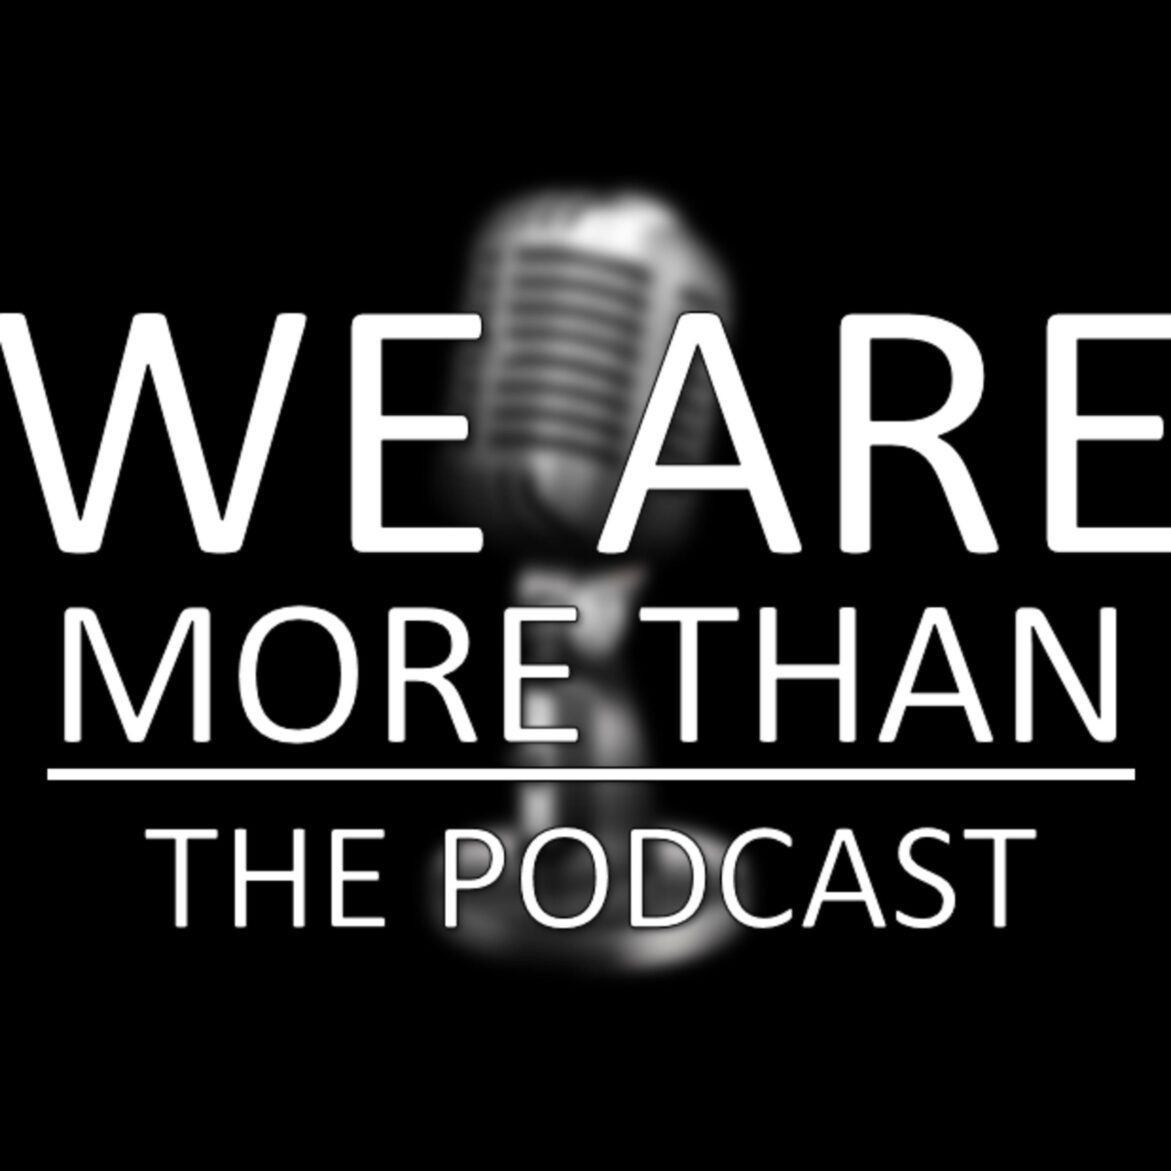 Black Podcasting - We Are More Than: Money Talks